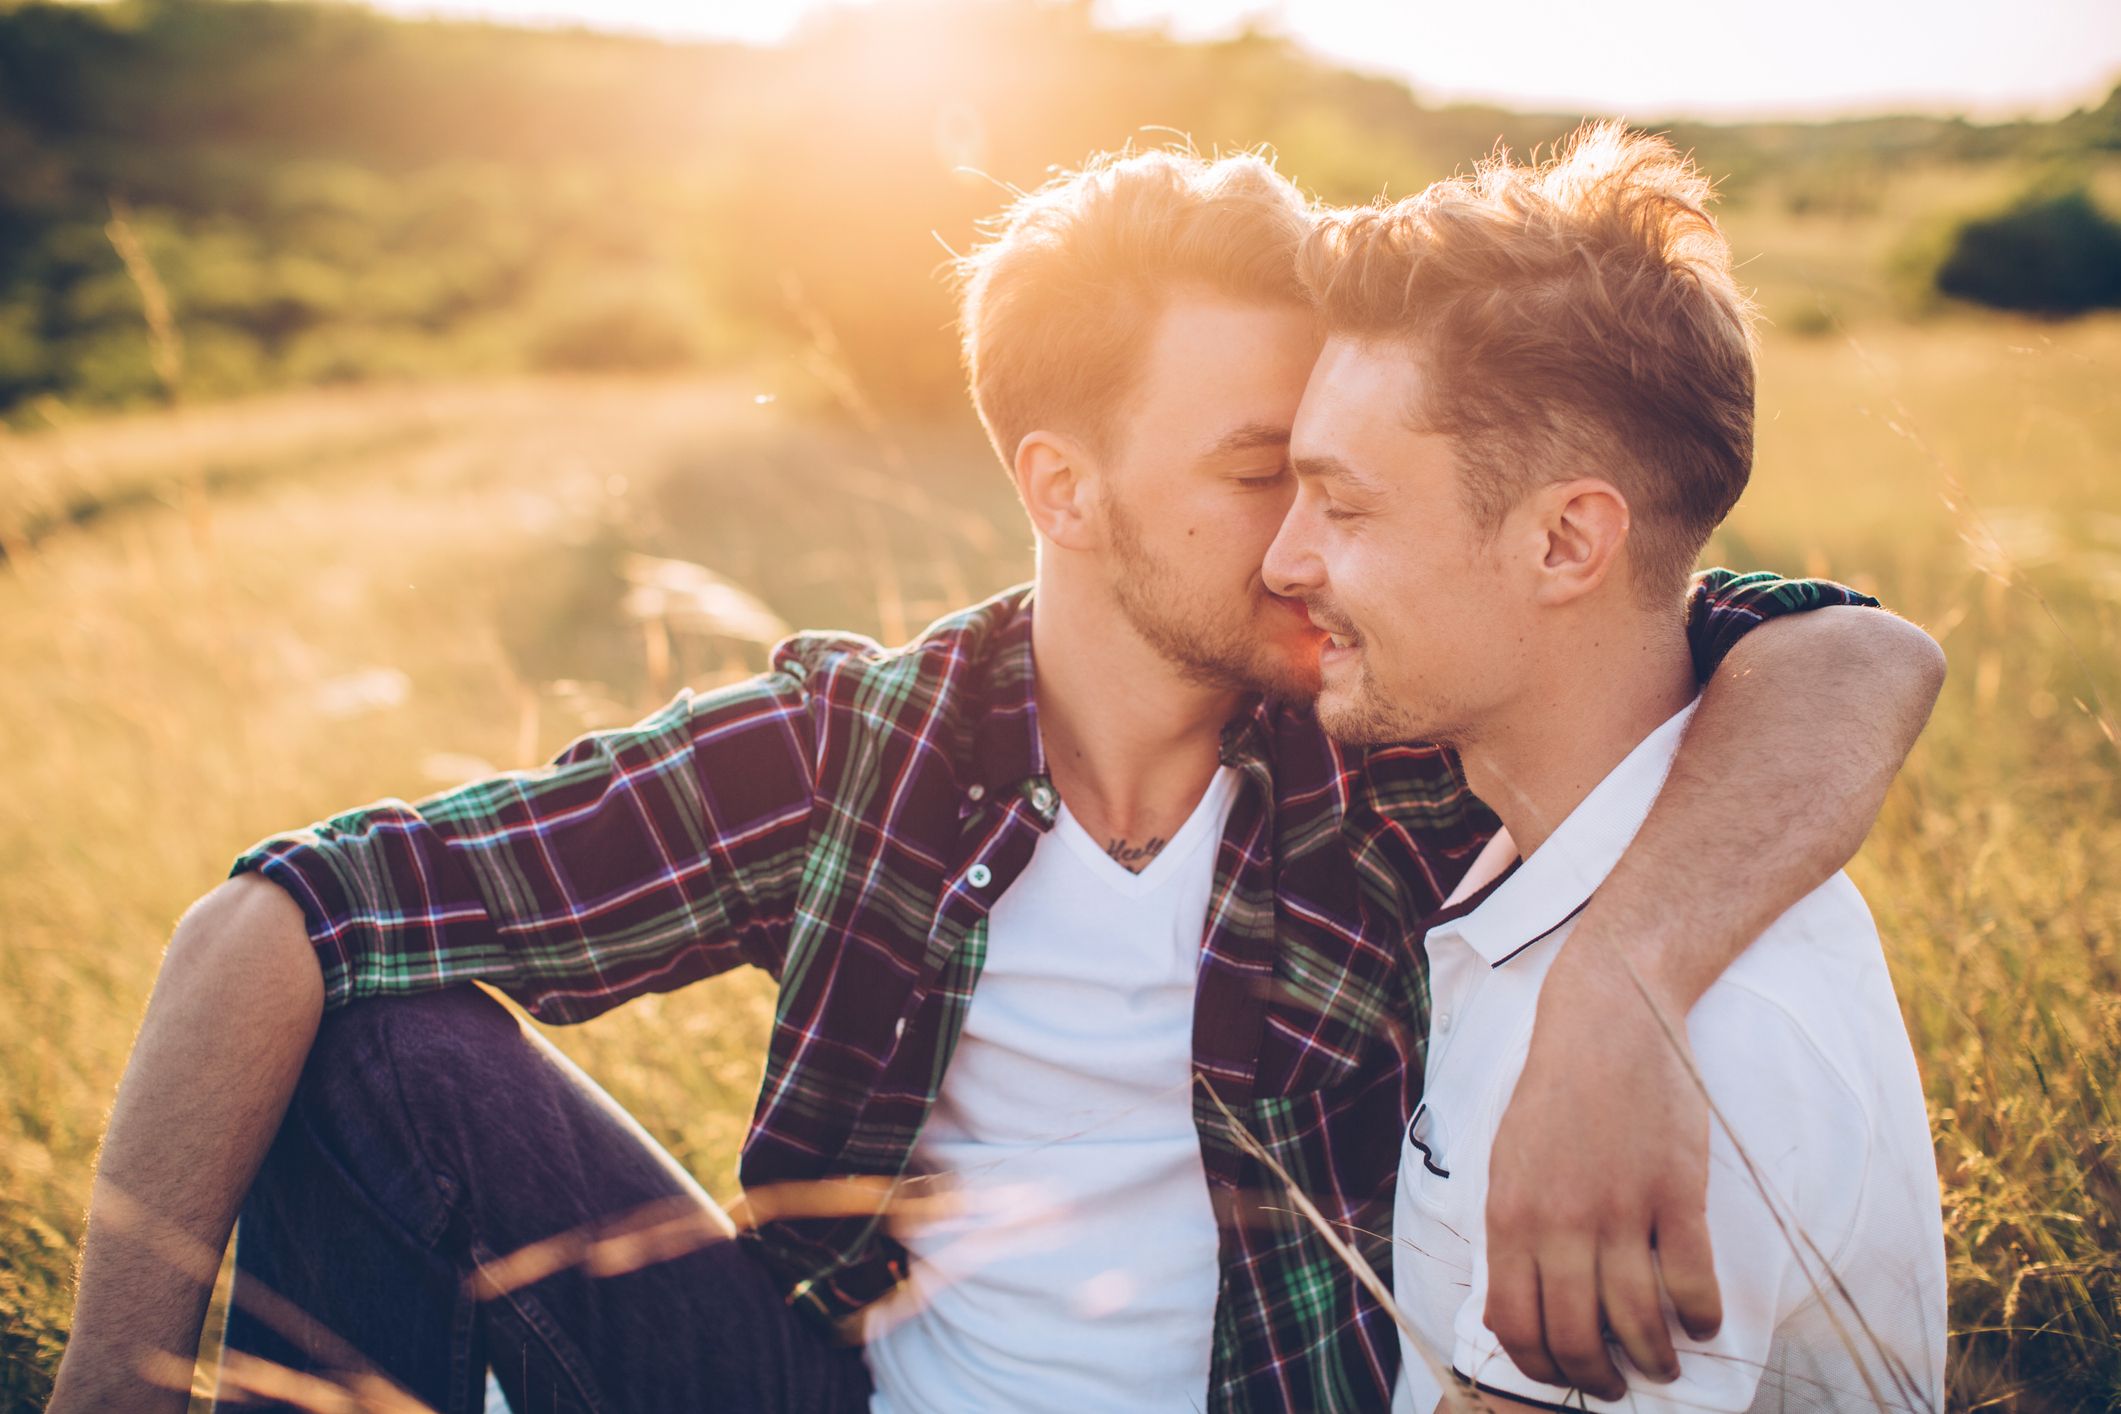 married bisexual men for dating